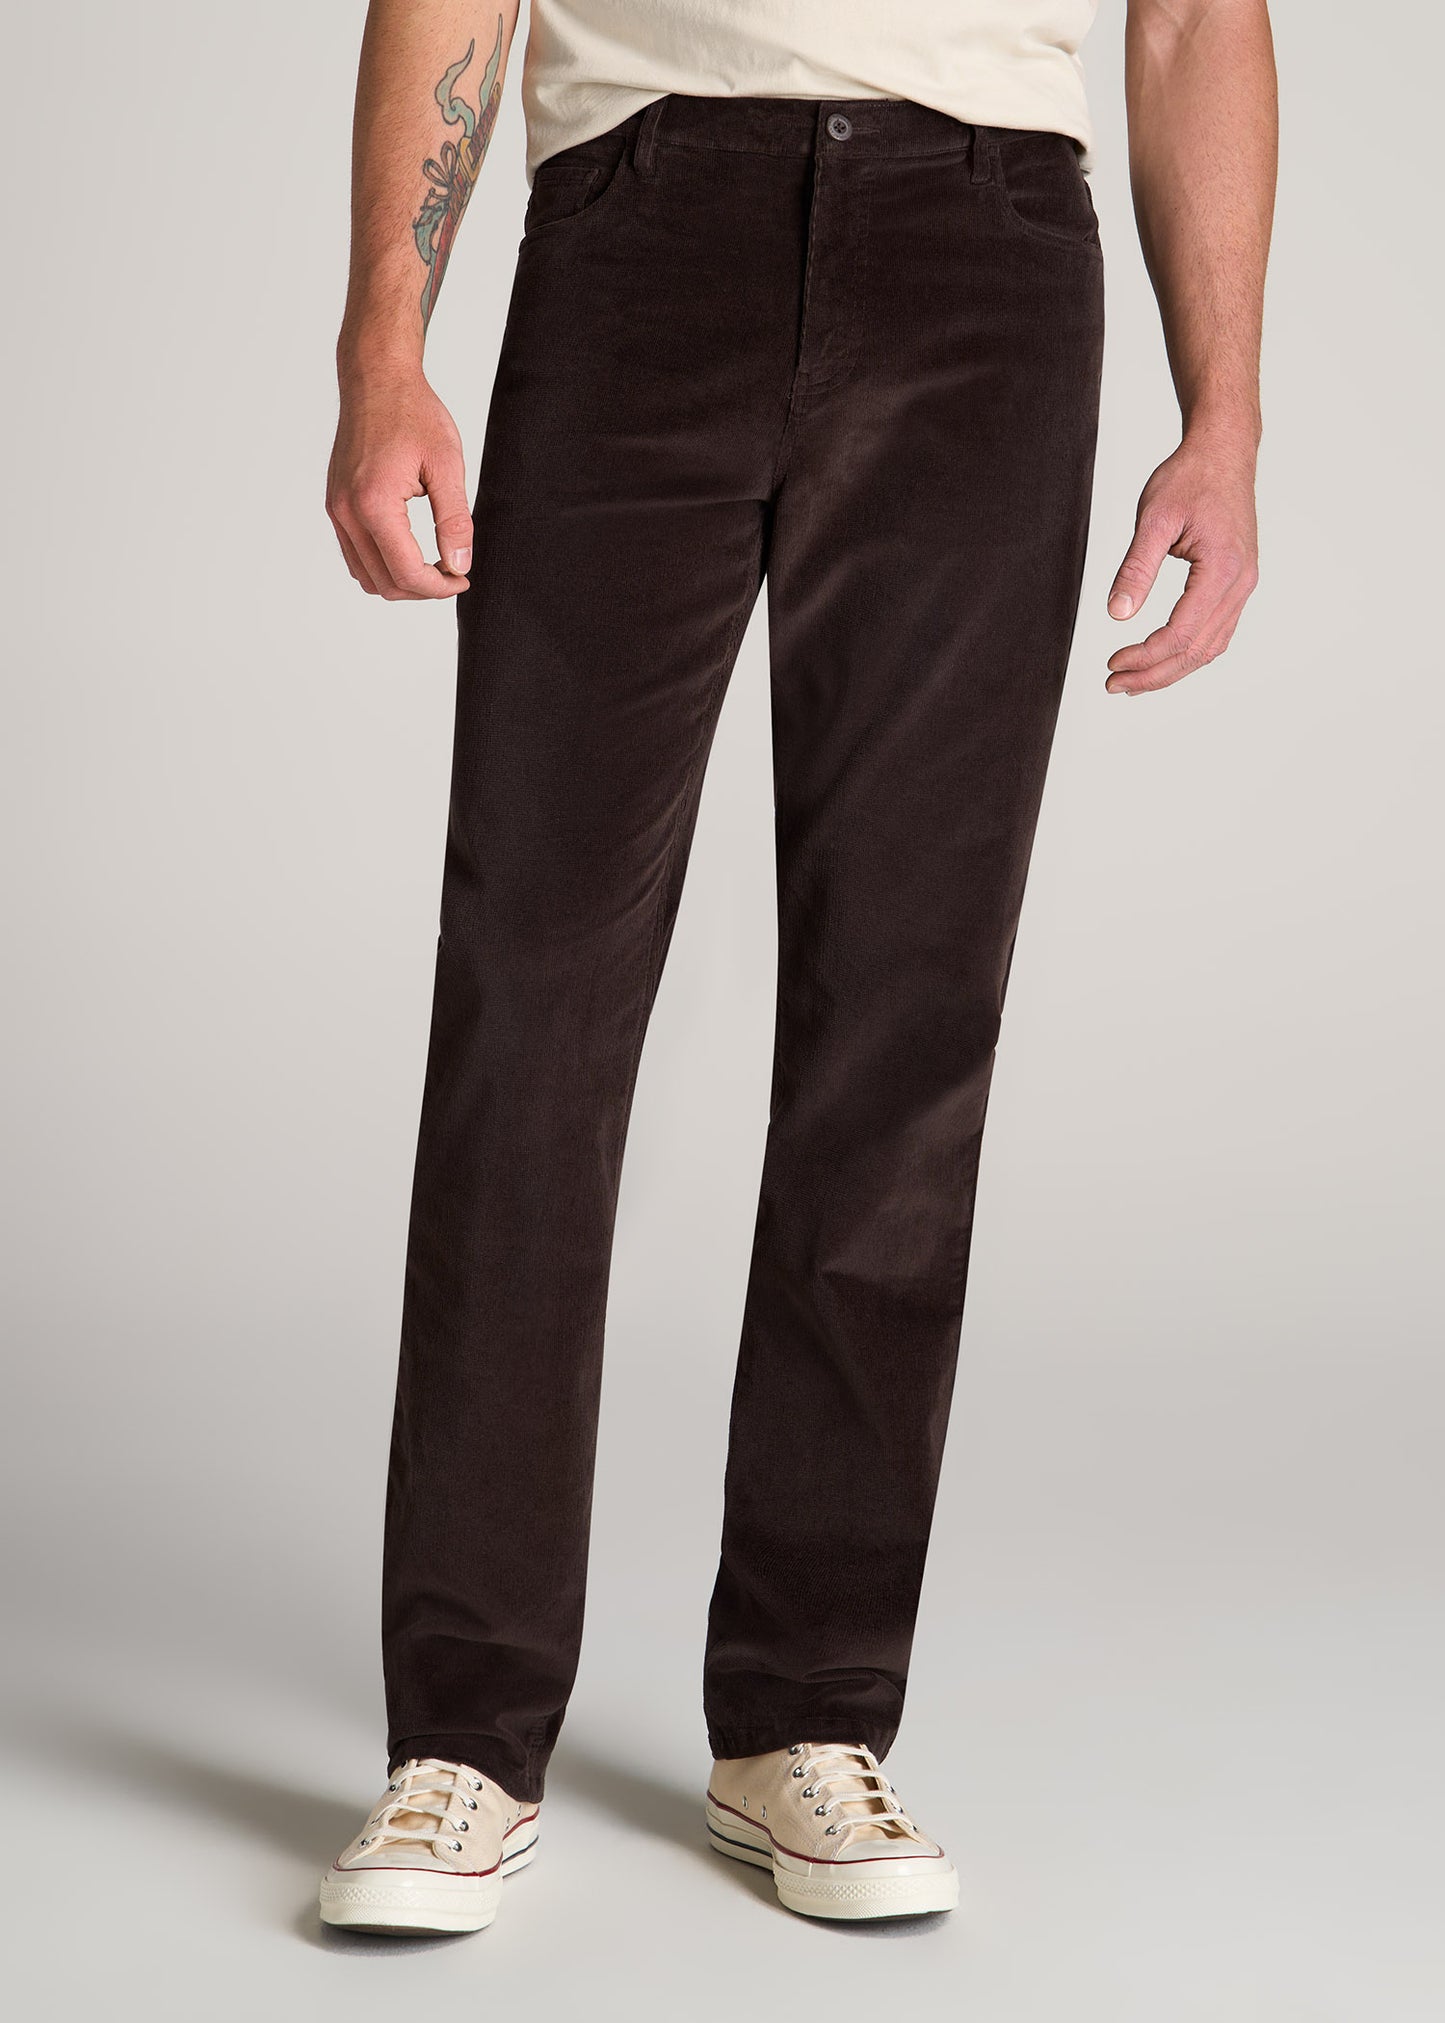 Dark Brown Corduroy Pants with Shoes Casual Outfits For Men After